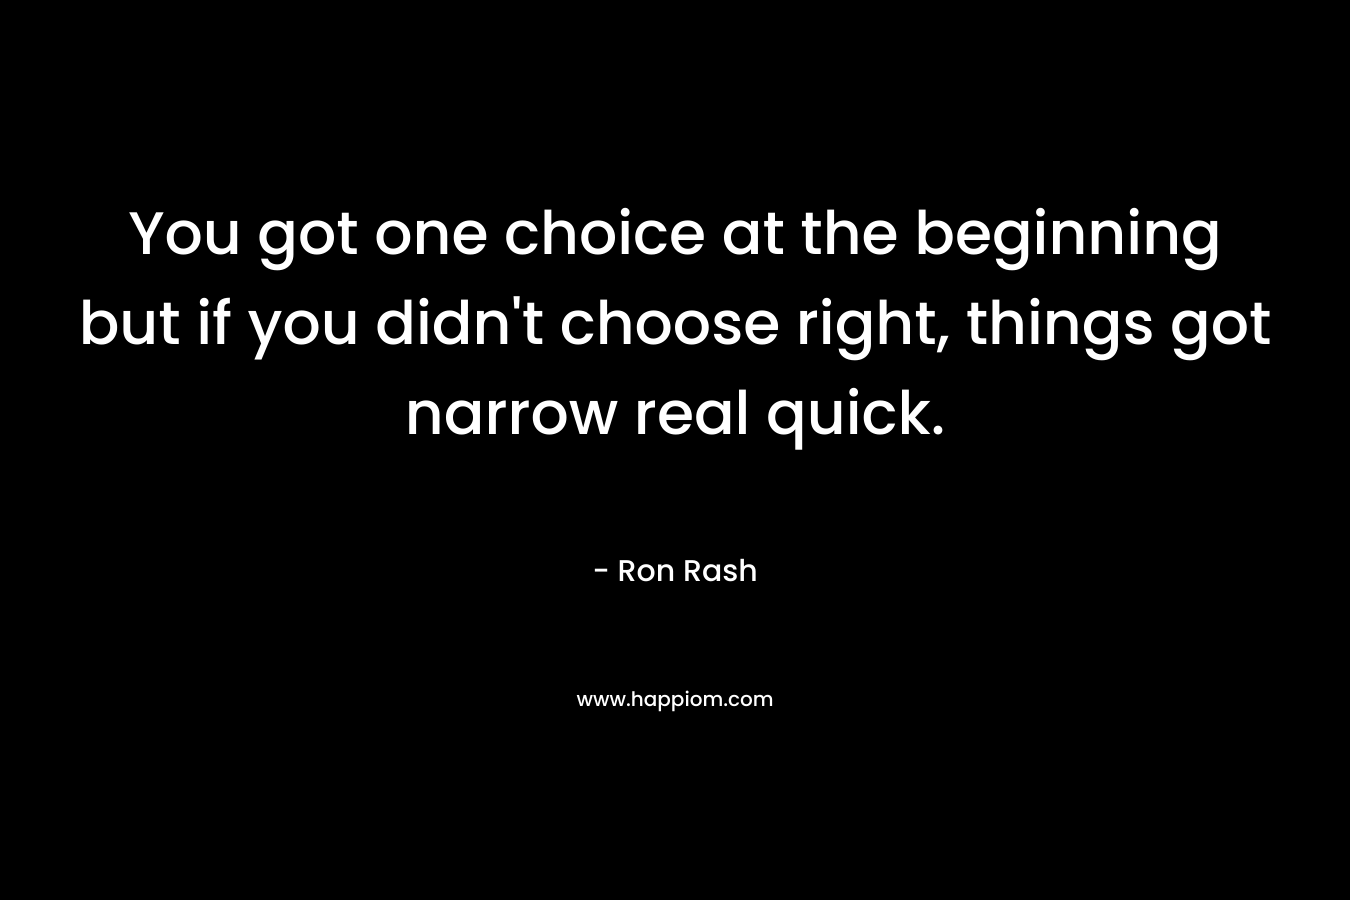 You got one choice at the beginning but if you didn’t choose right, things got narrow real quick. – Ron Rash